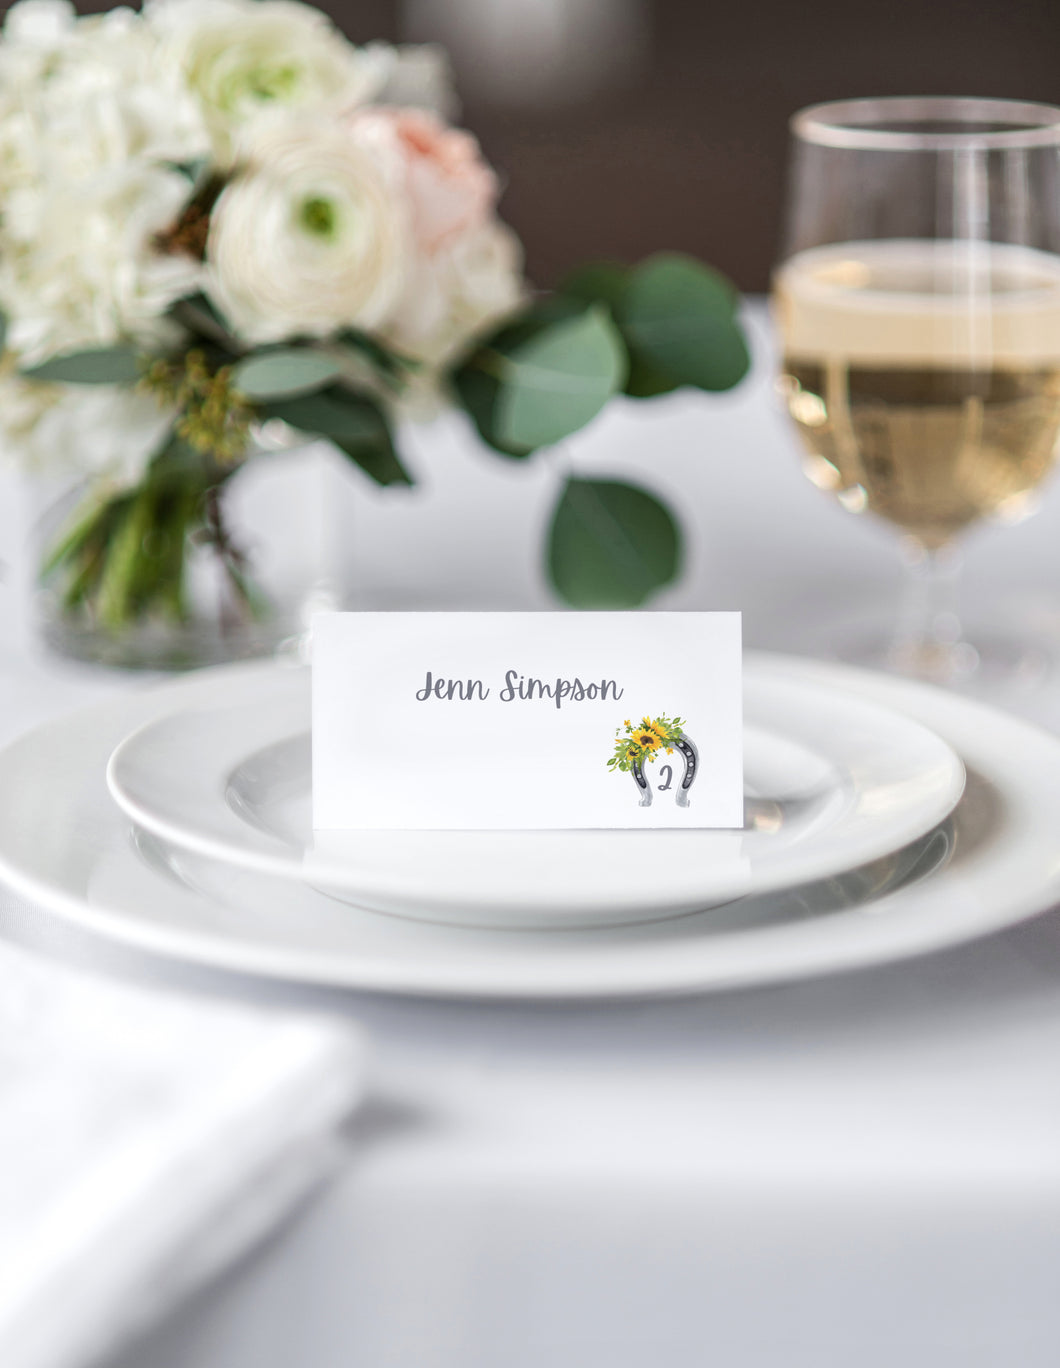 Rustic Chic Wedding Place Cards